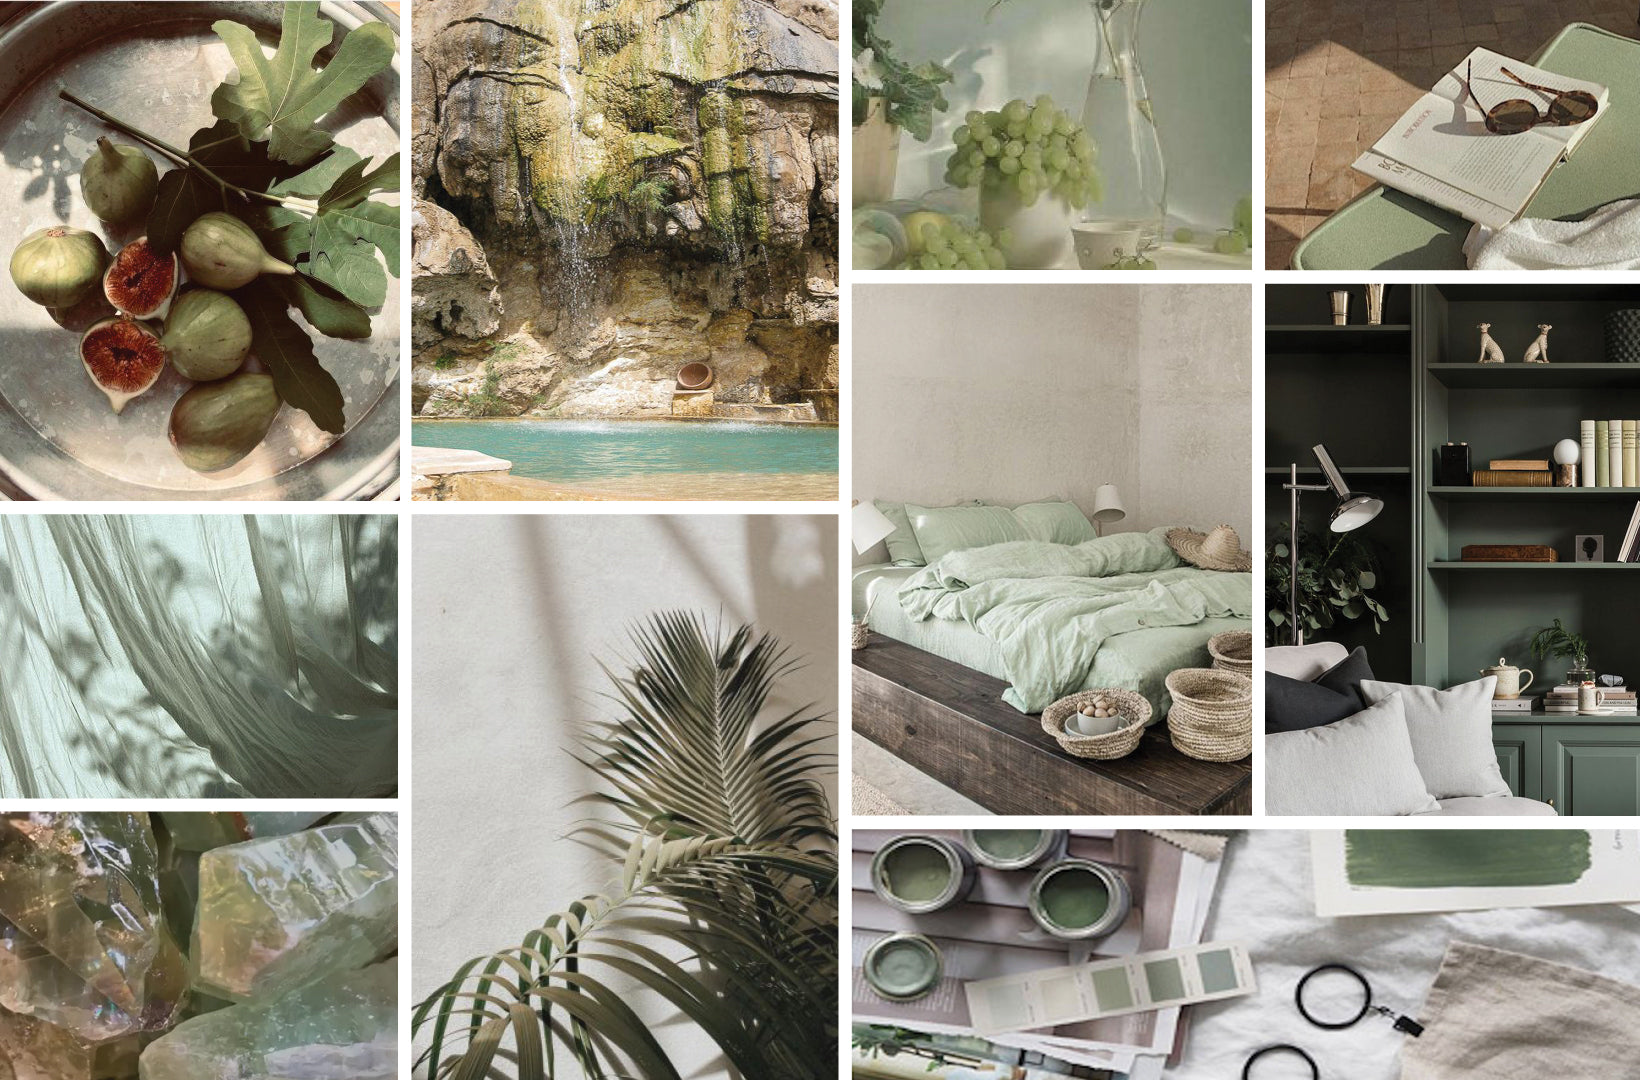 A collage of inspo-images show natural scenes like palm leaves, fresh fruit, and linen gauze in shades of light green